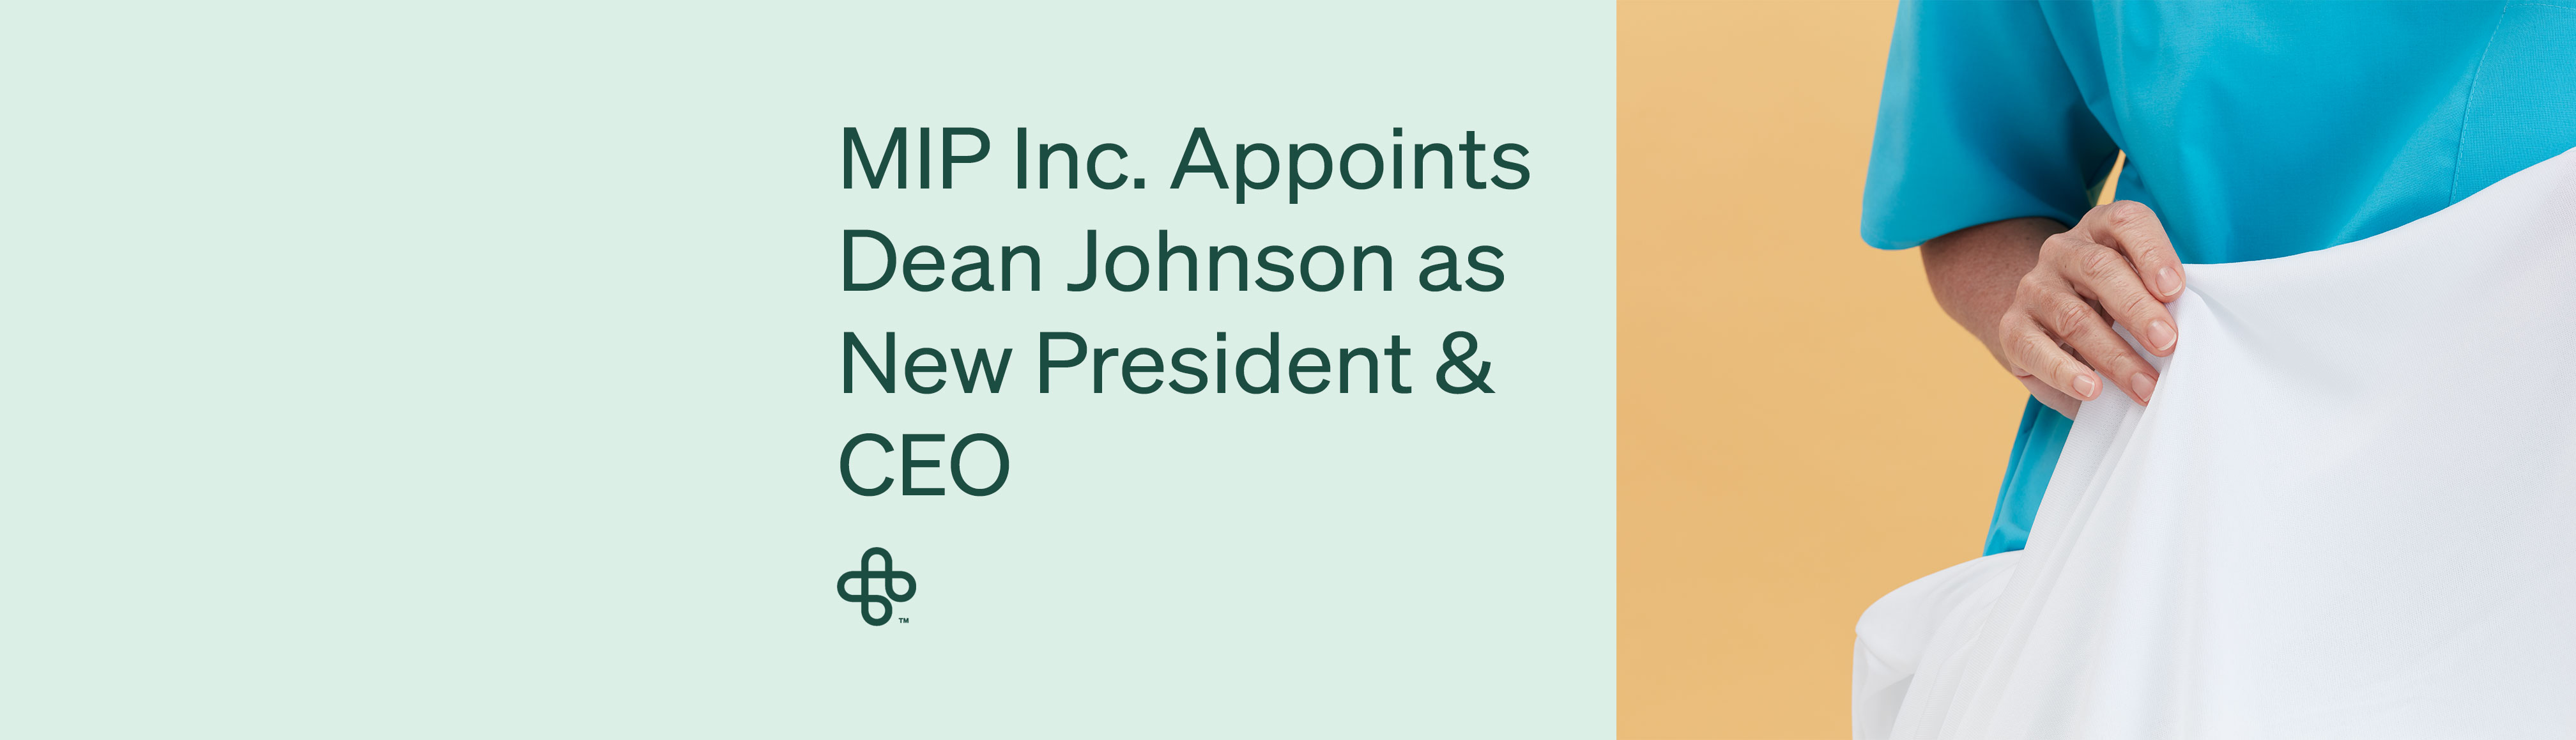 MIP Inc. Appoints Dean Johnson as New President & CEO